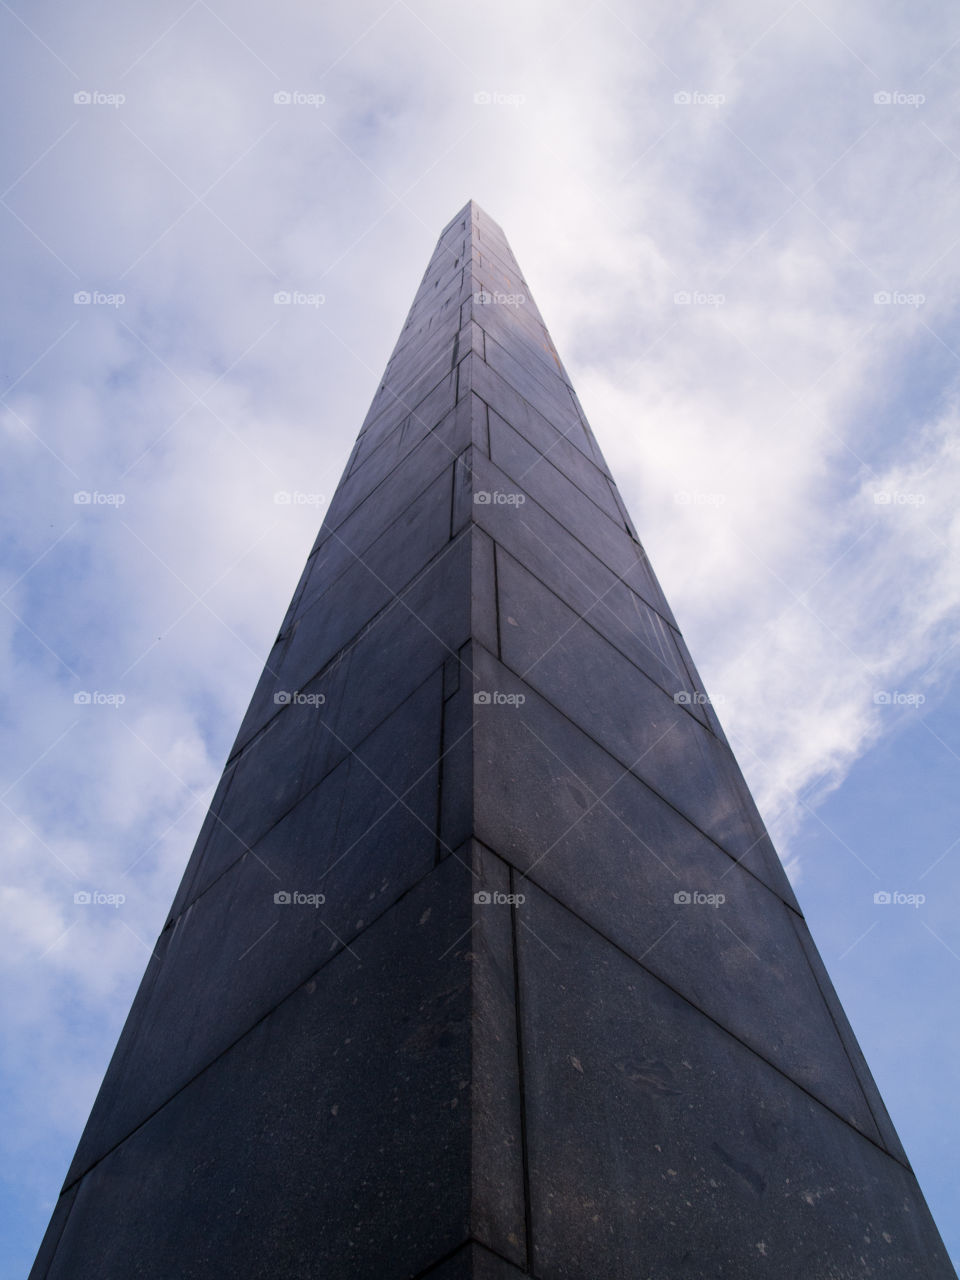 gray concrete cone-shaped monument under a blue sky with white clouds 3